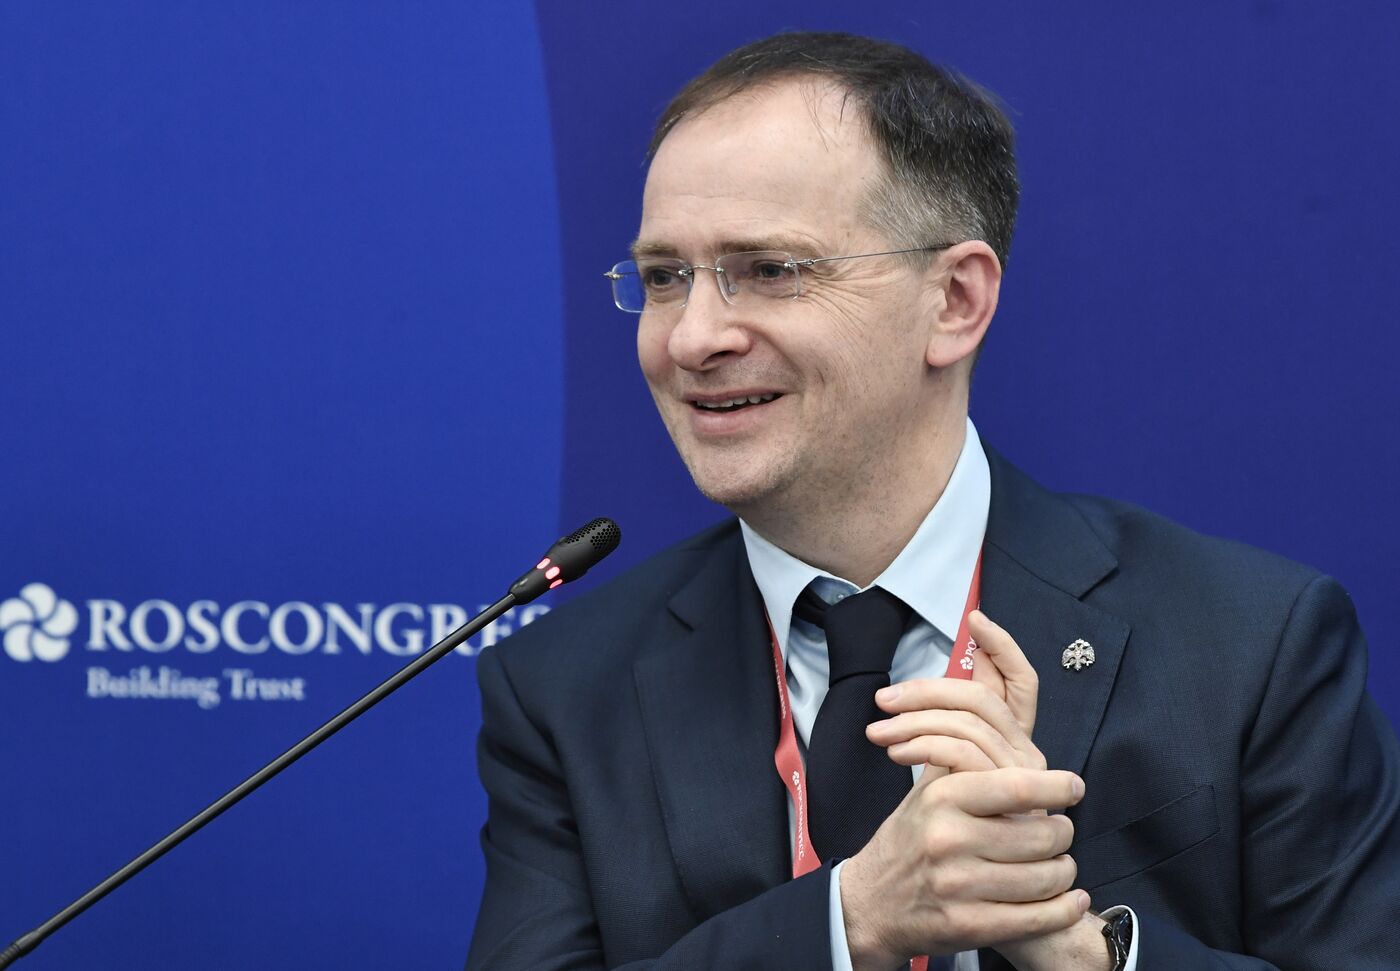 SPIEF-2023. The Language of Diplomacy in a Multipolar World